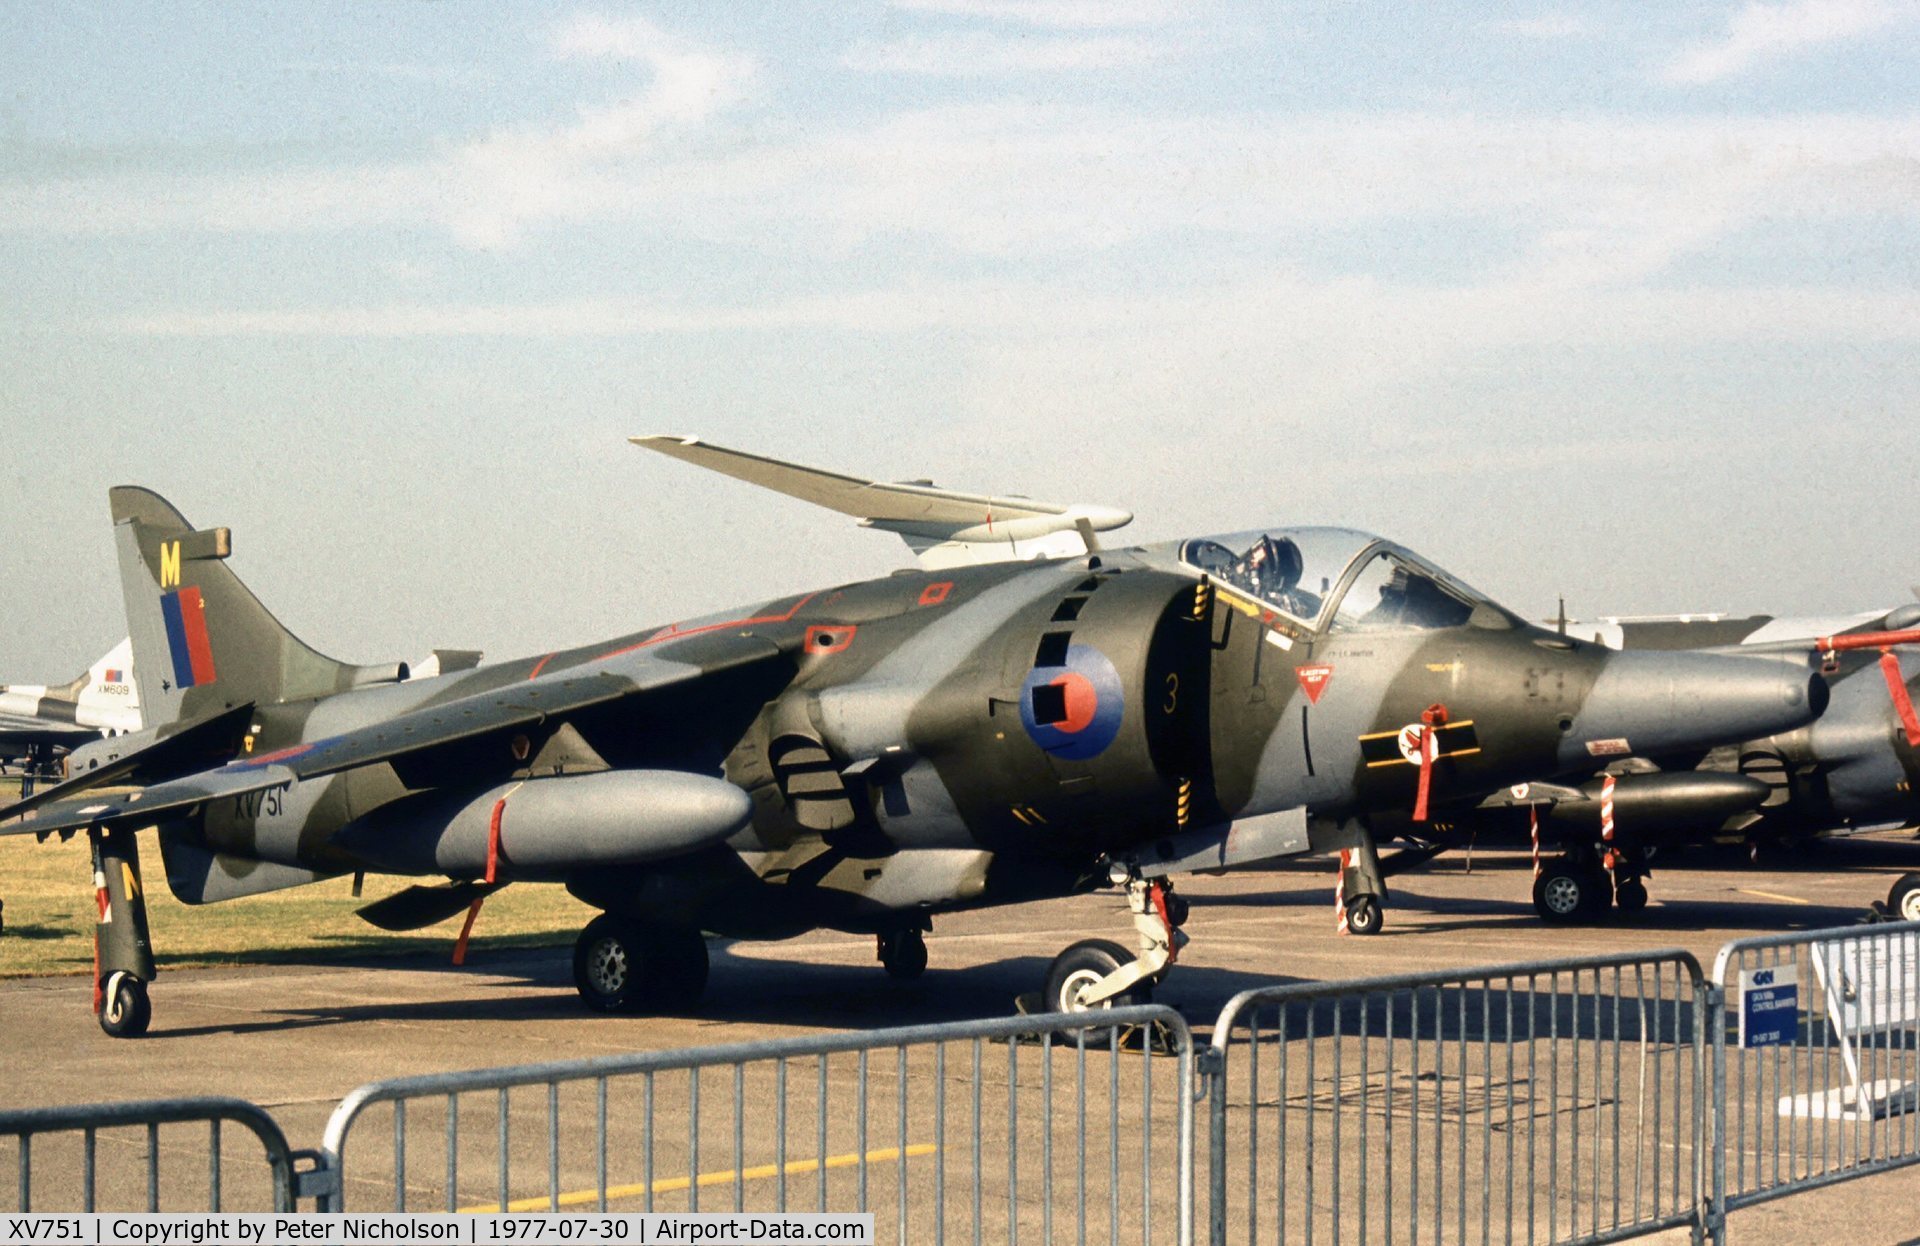 XV751, 1969 Hawker Siddeley Harrier GR.3 C/N 712014, Harrier GR.3 of 3 Squadron on display at the 1977 Royal Review at RAF Finningley.